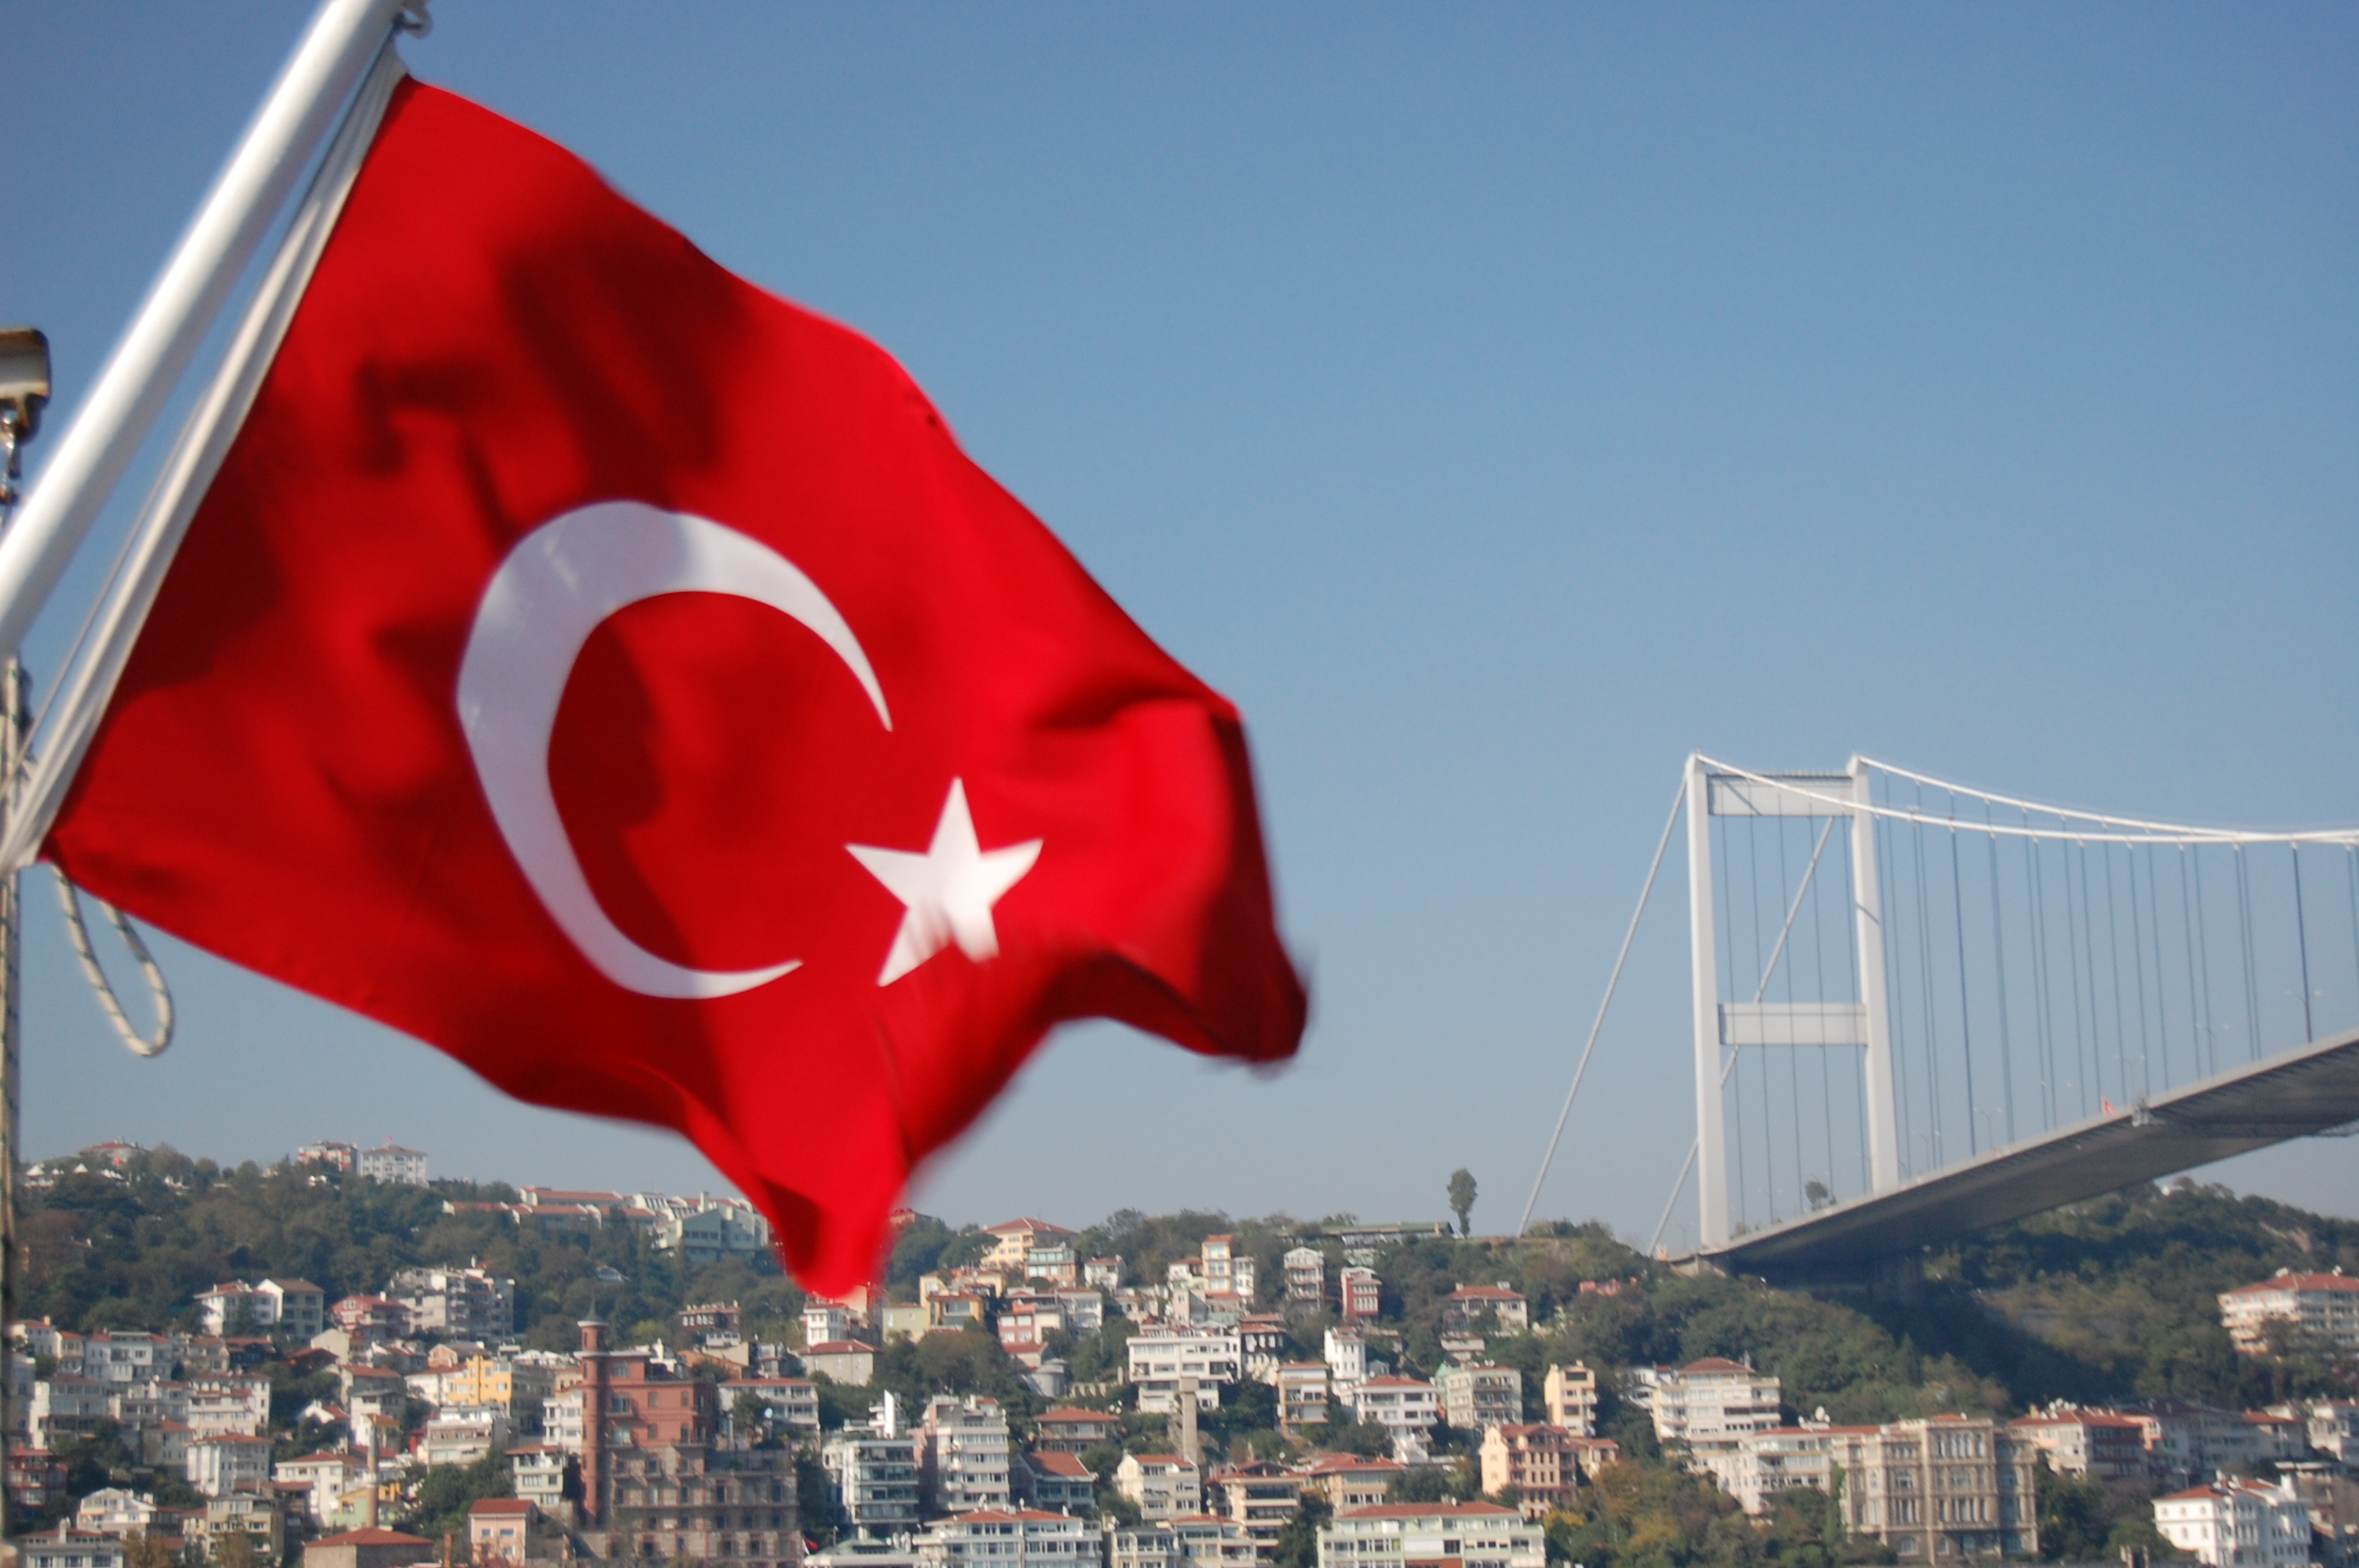 Turkish authorities dismiss over 250 local officials for suspected links to terrorist groups 